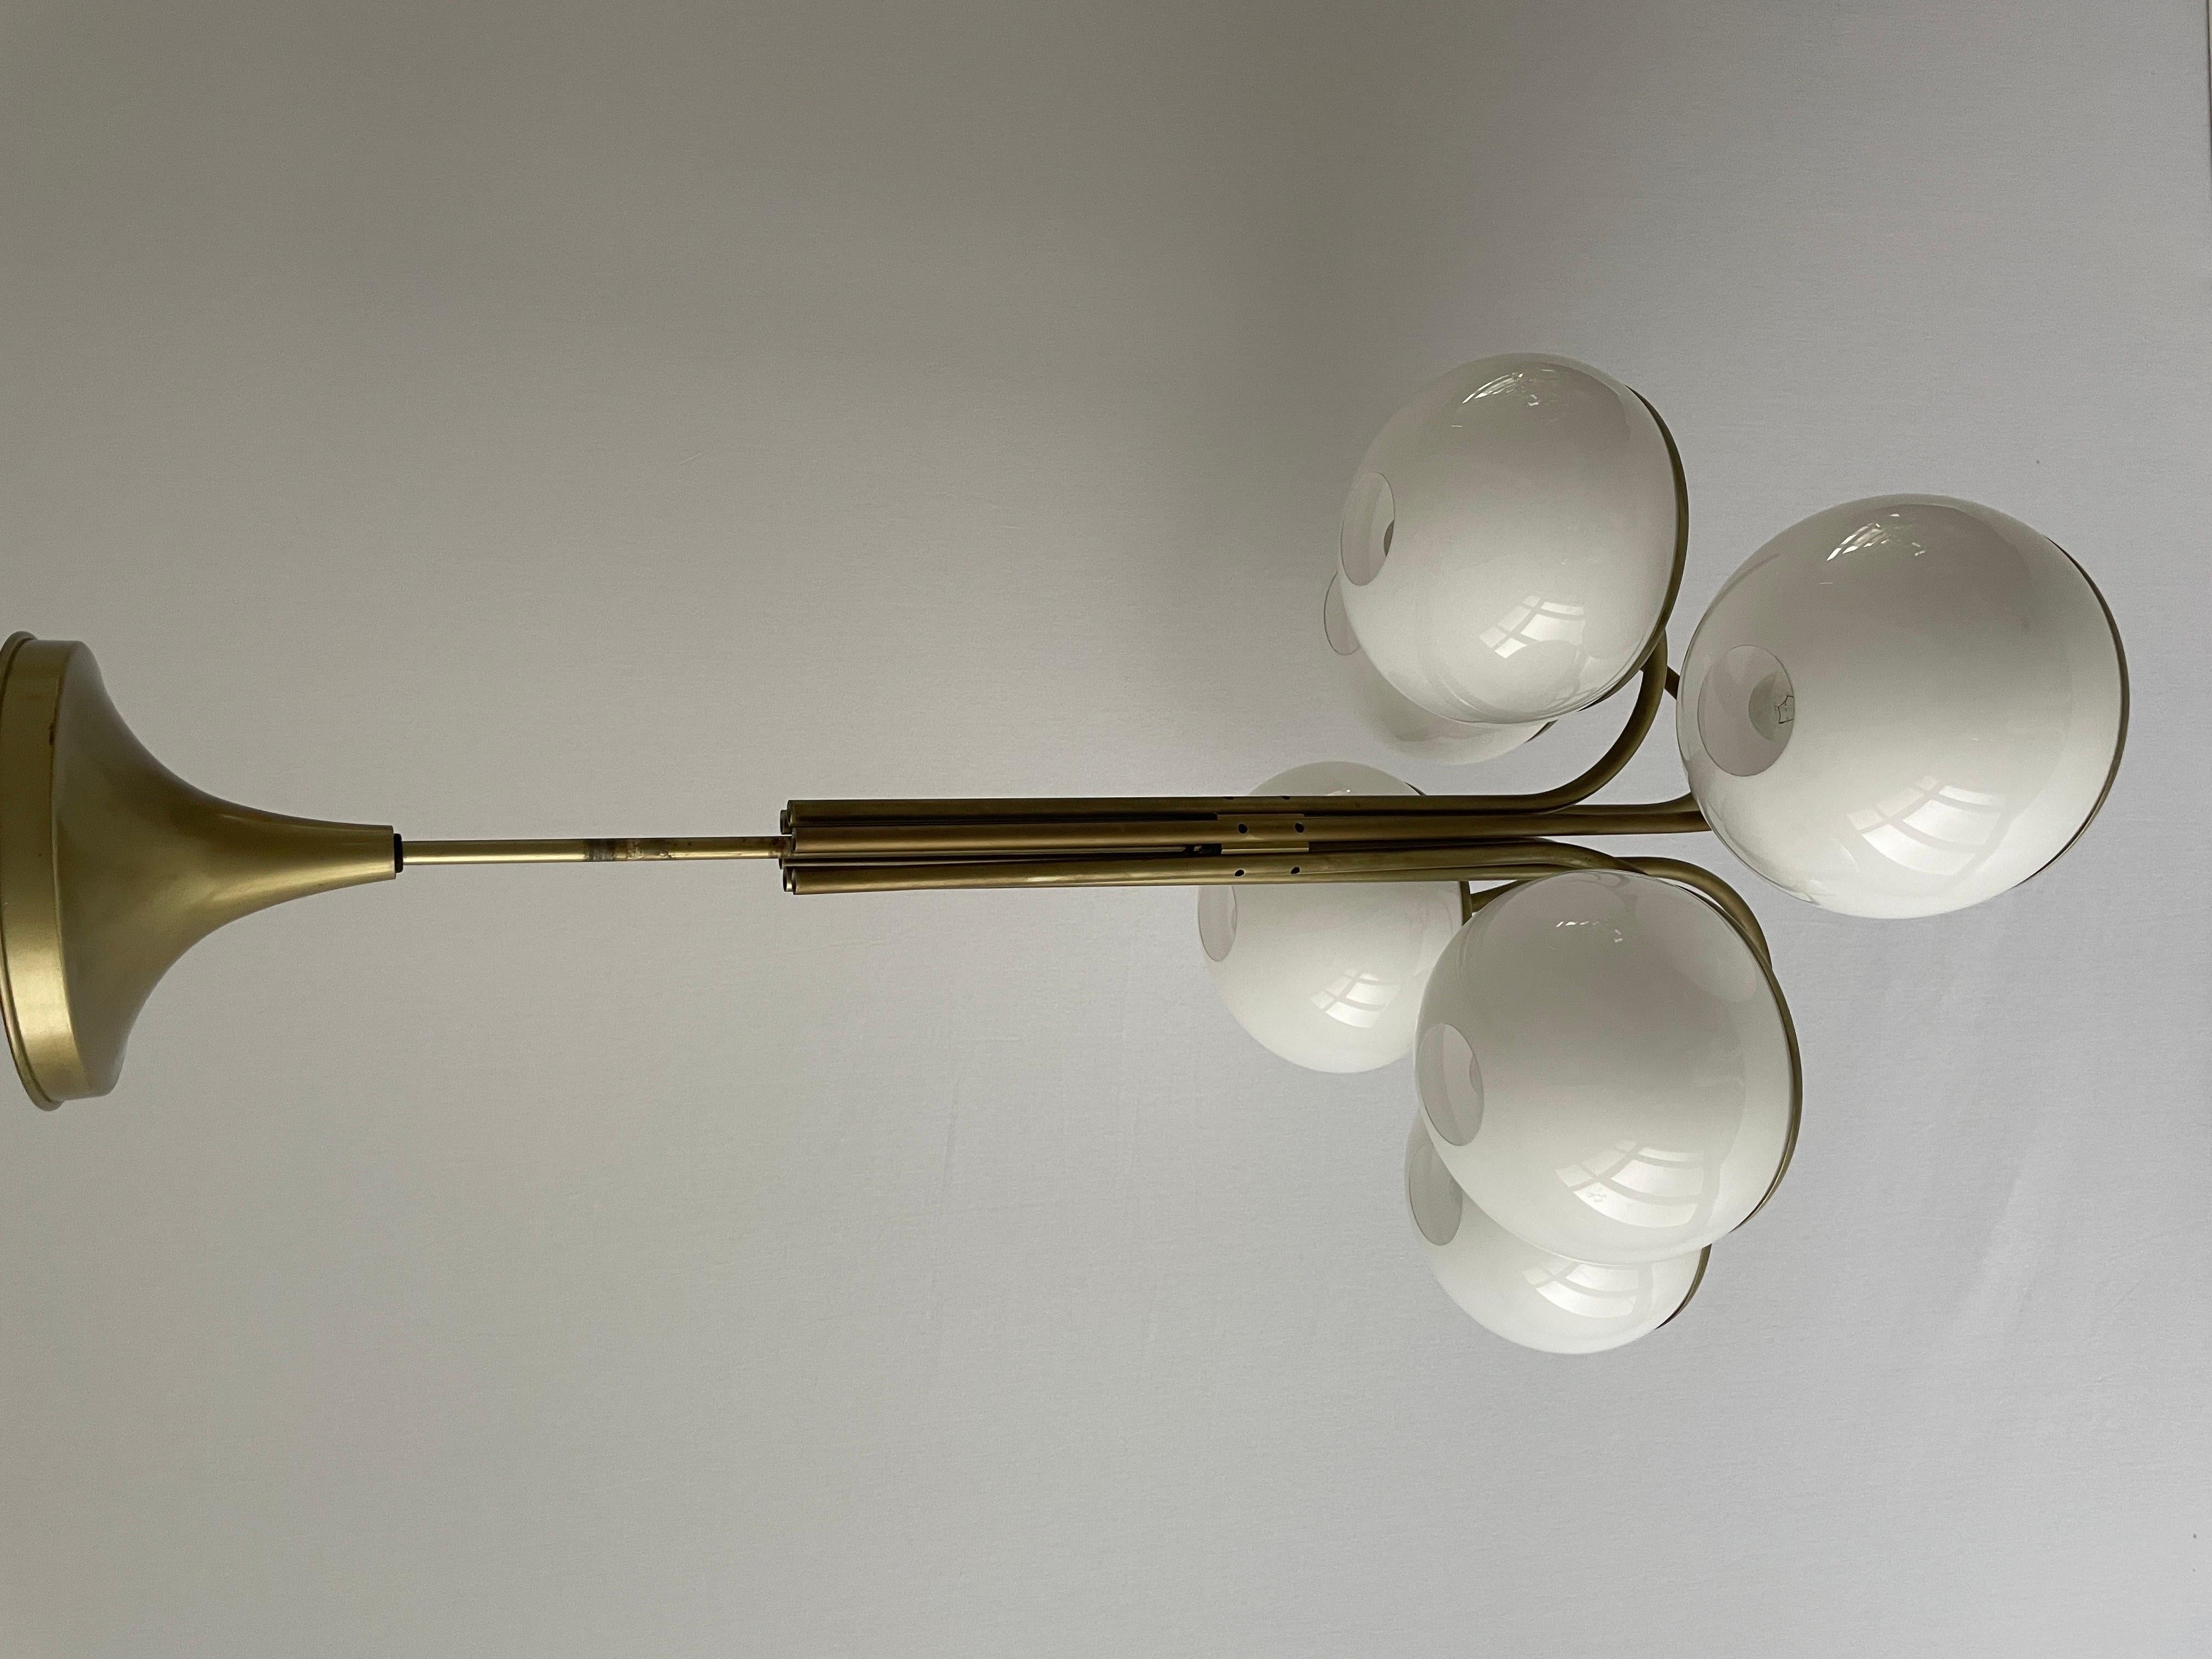 6 Acrylic Balls Shade Chandelier by Arteluce, 1960s, Italy For Sale 2